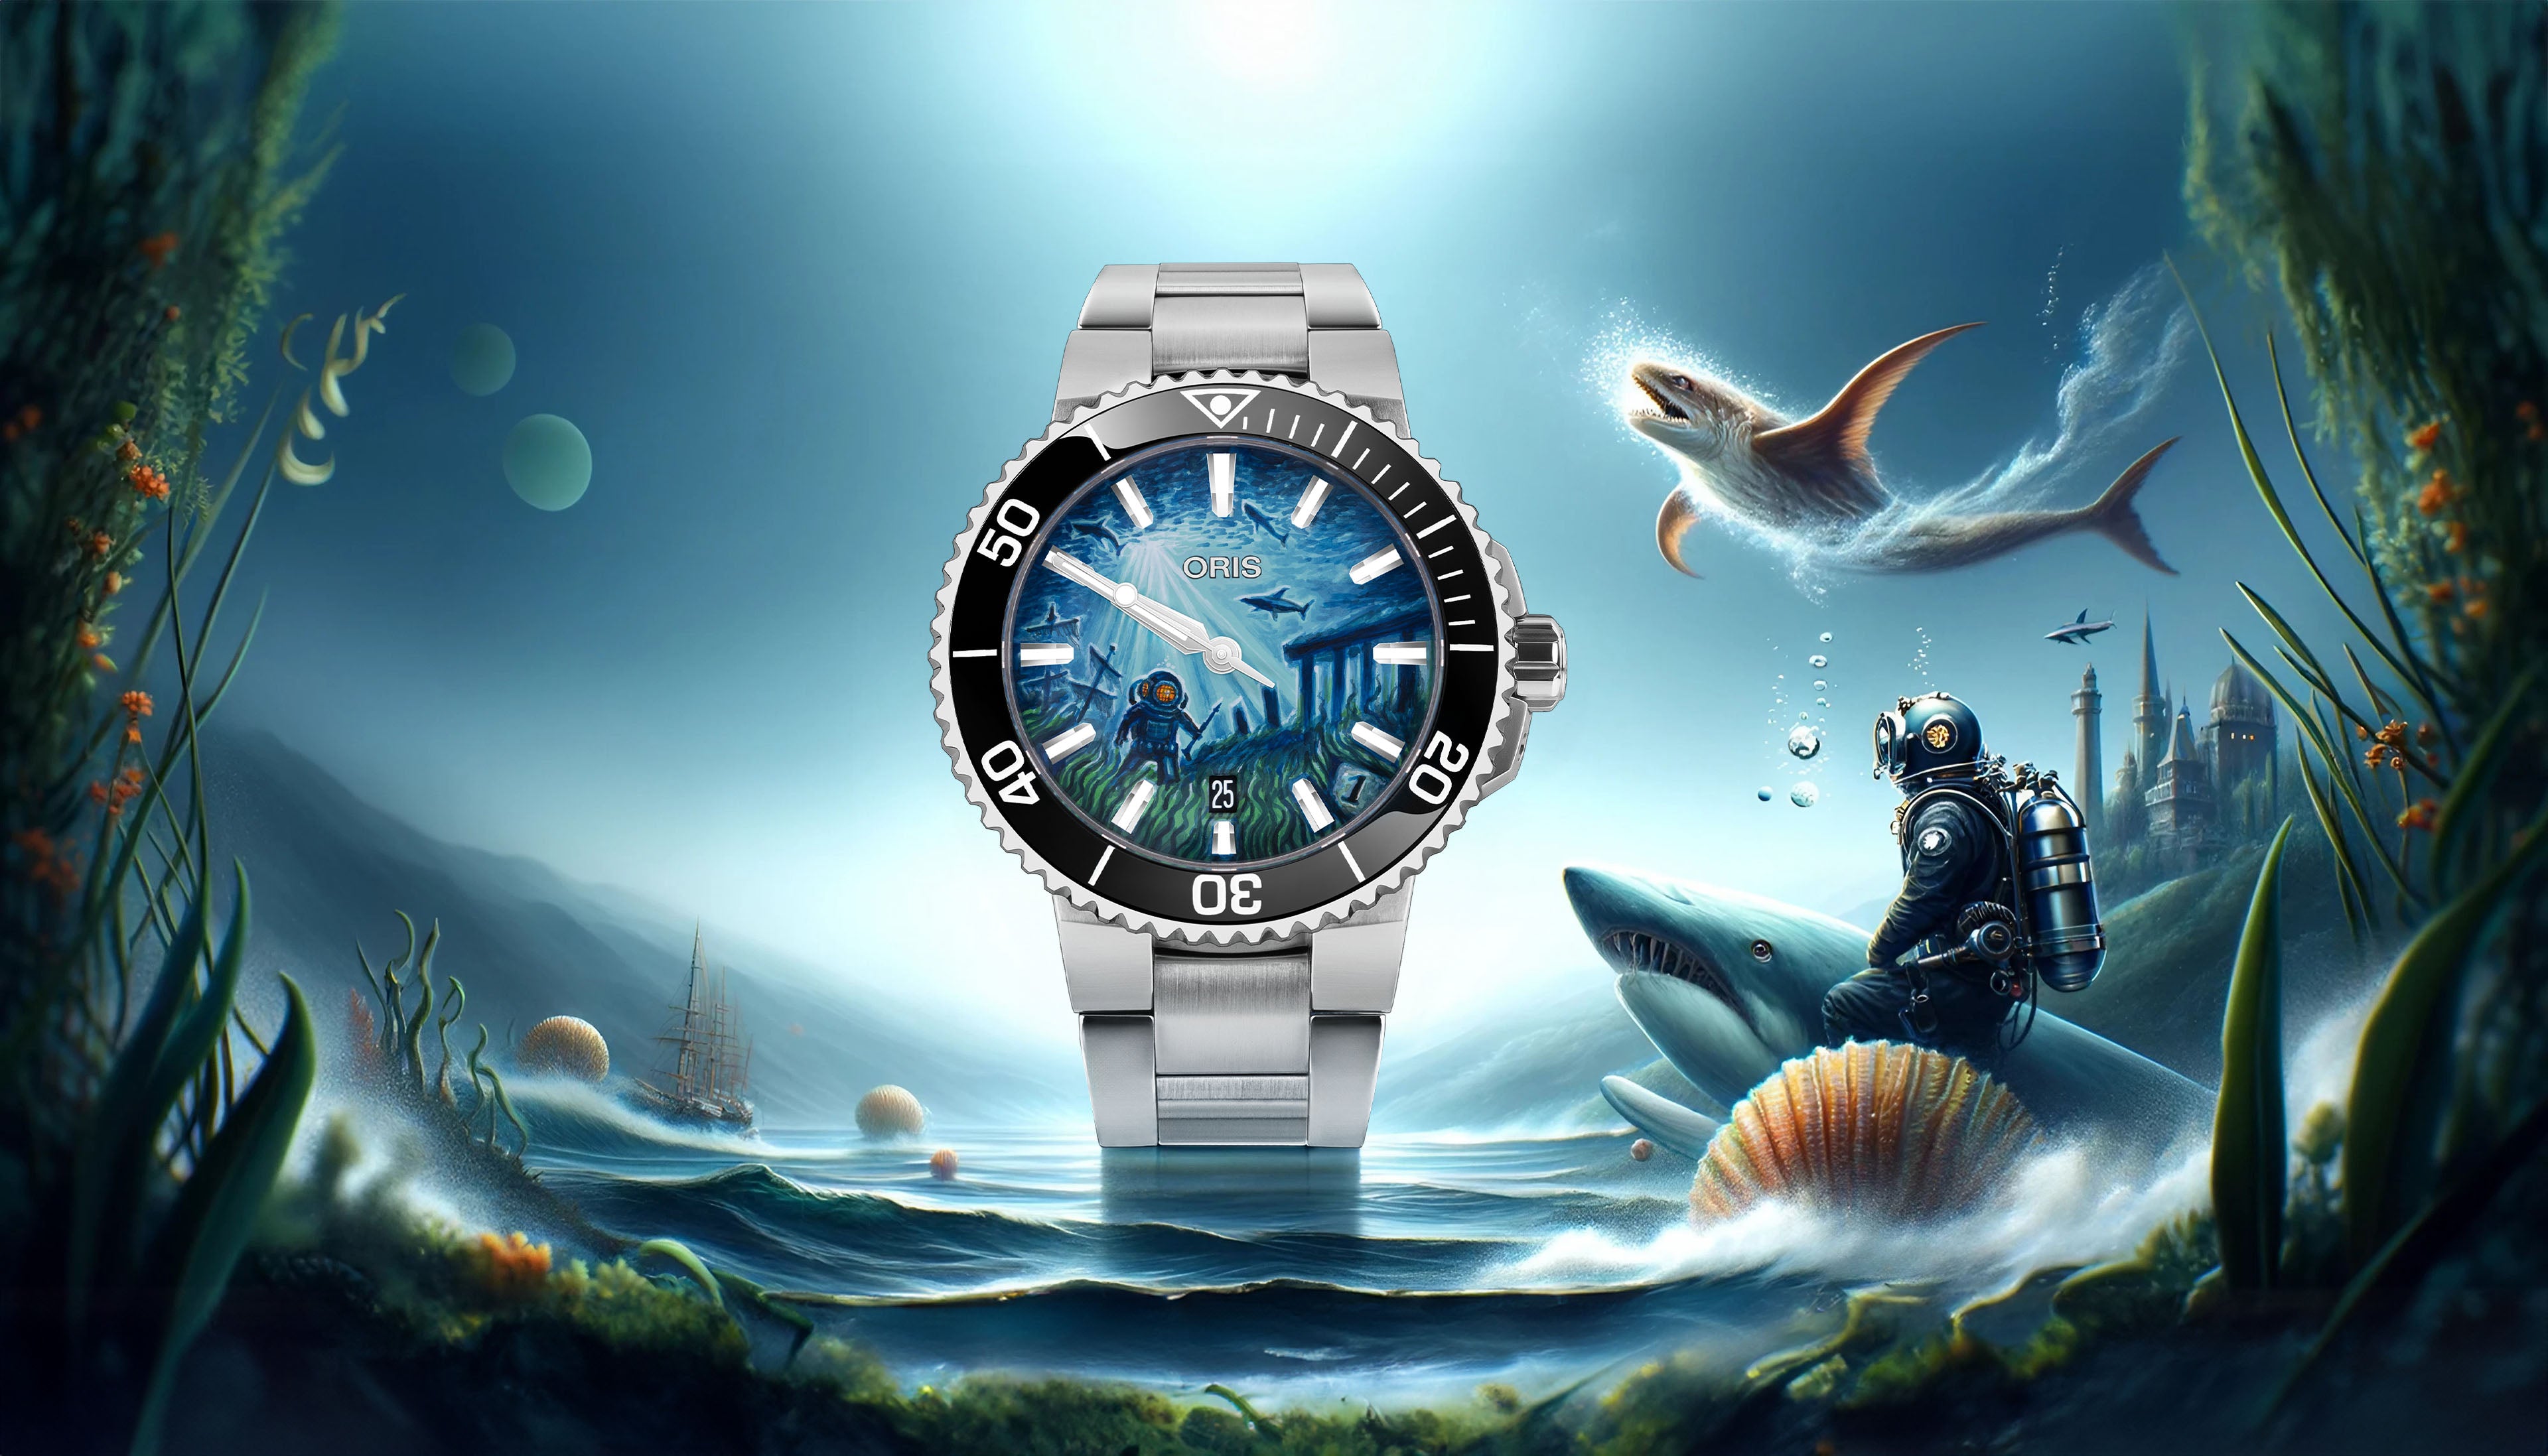 Hand-painted Oris Aquis Atlantis watch dial with ocean depths theme for luxury diving enthusiasts